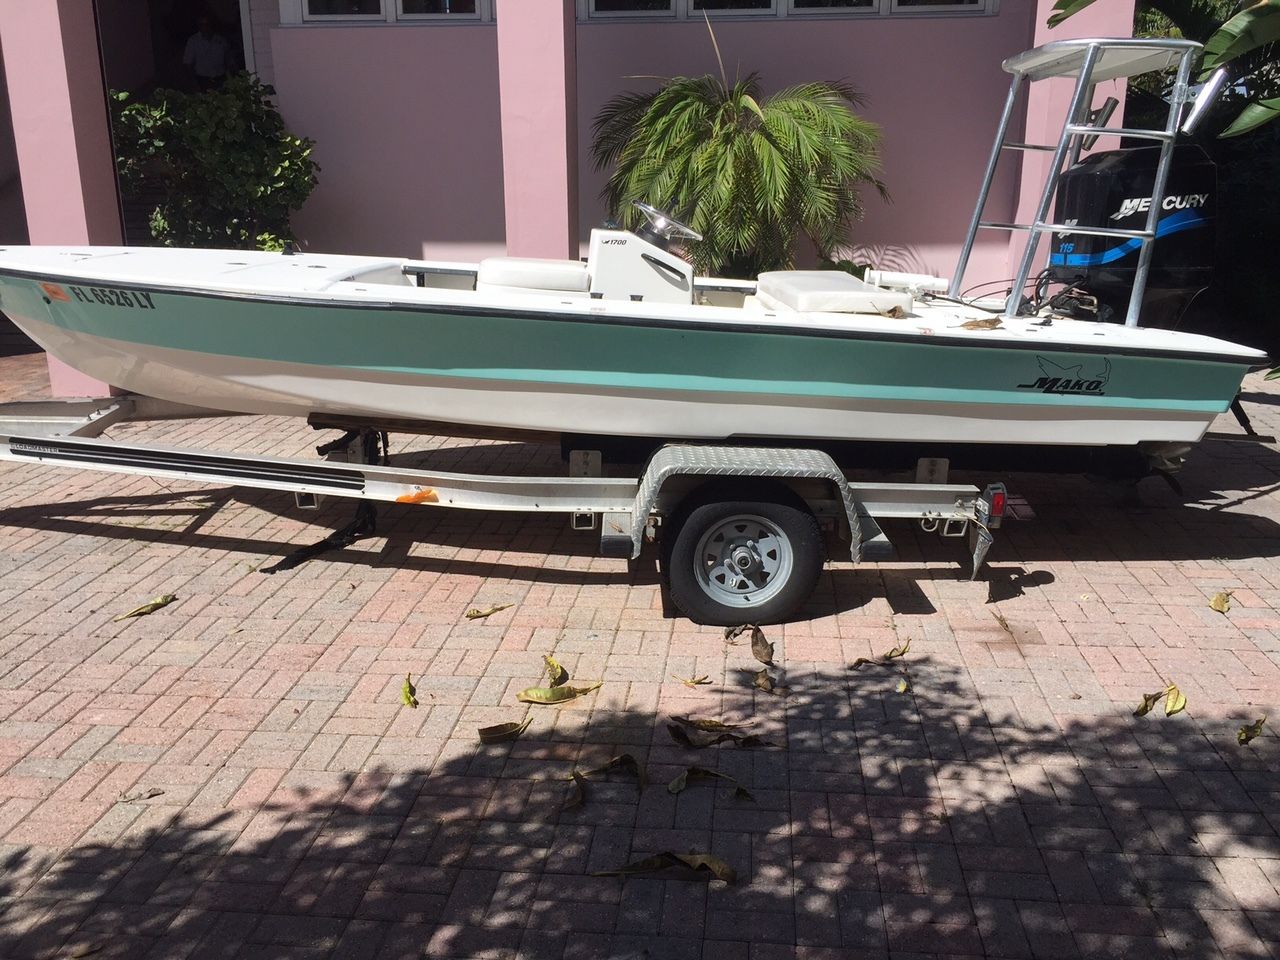 Mako 1700 Inshore 2005 for sale for $7,000 - Boats-from ...